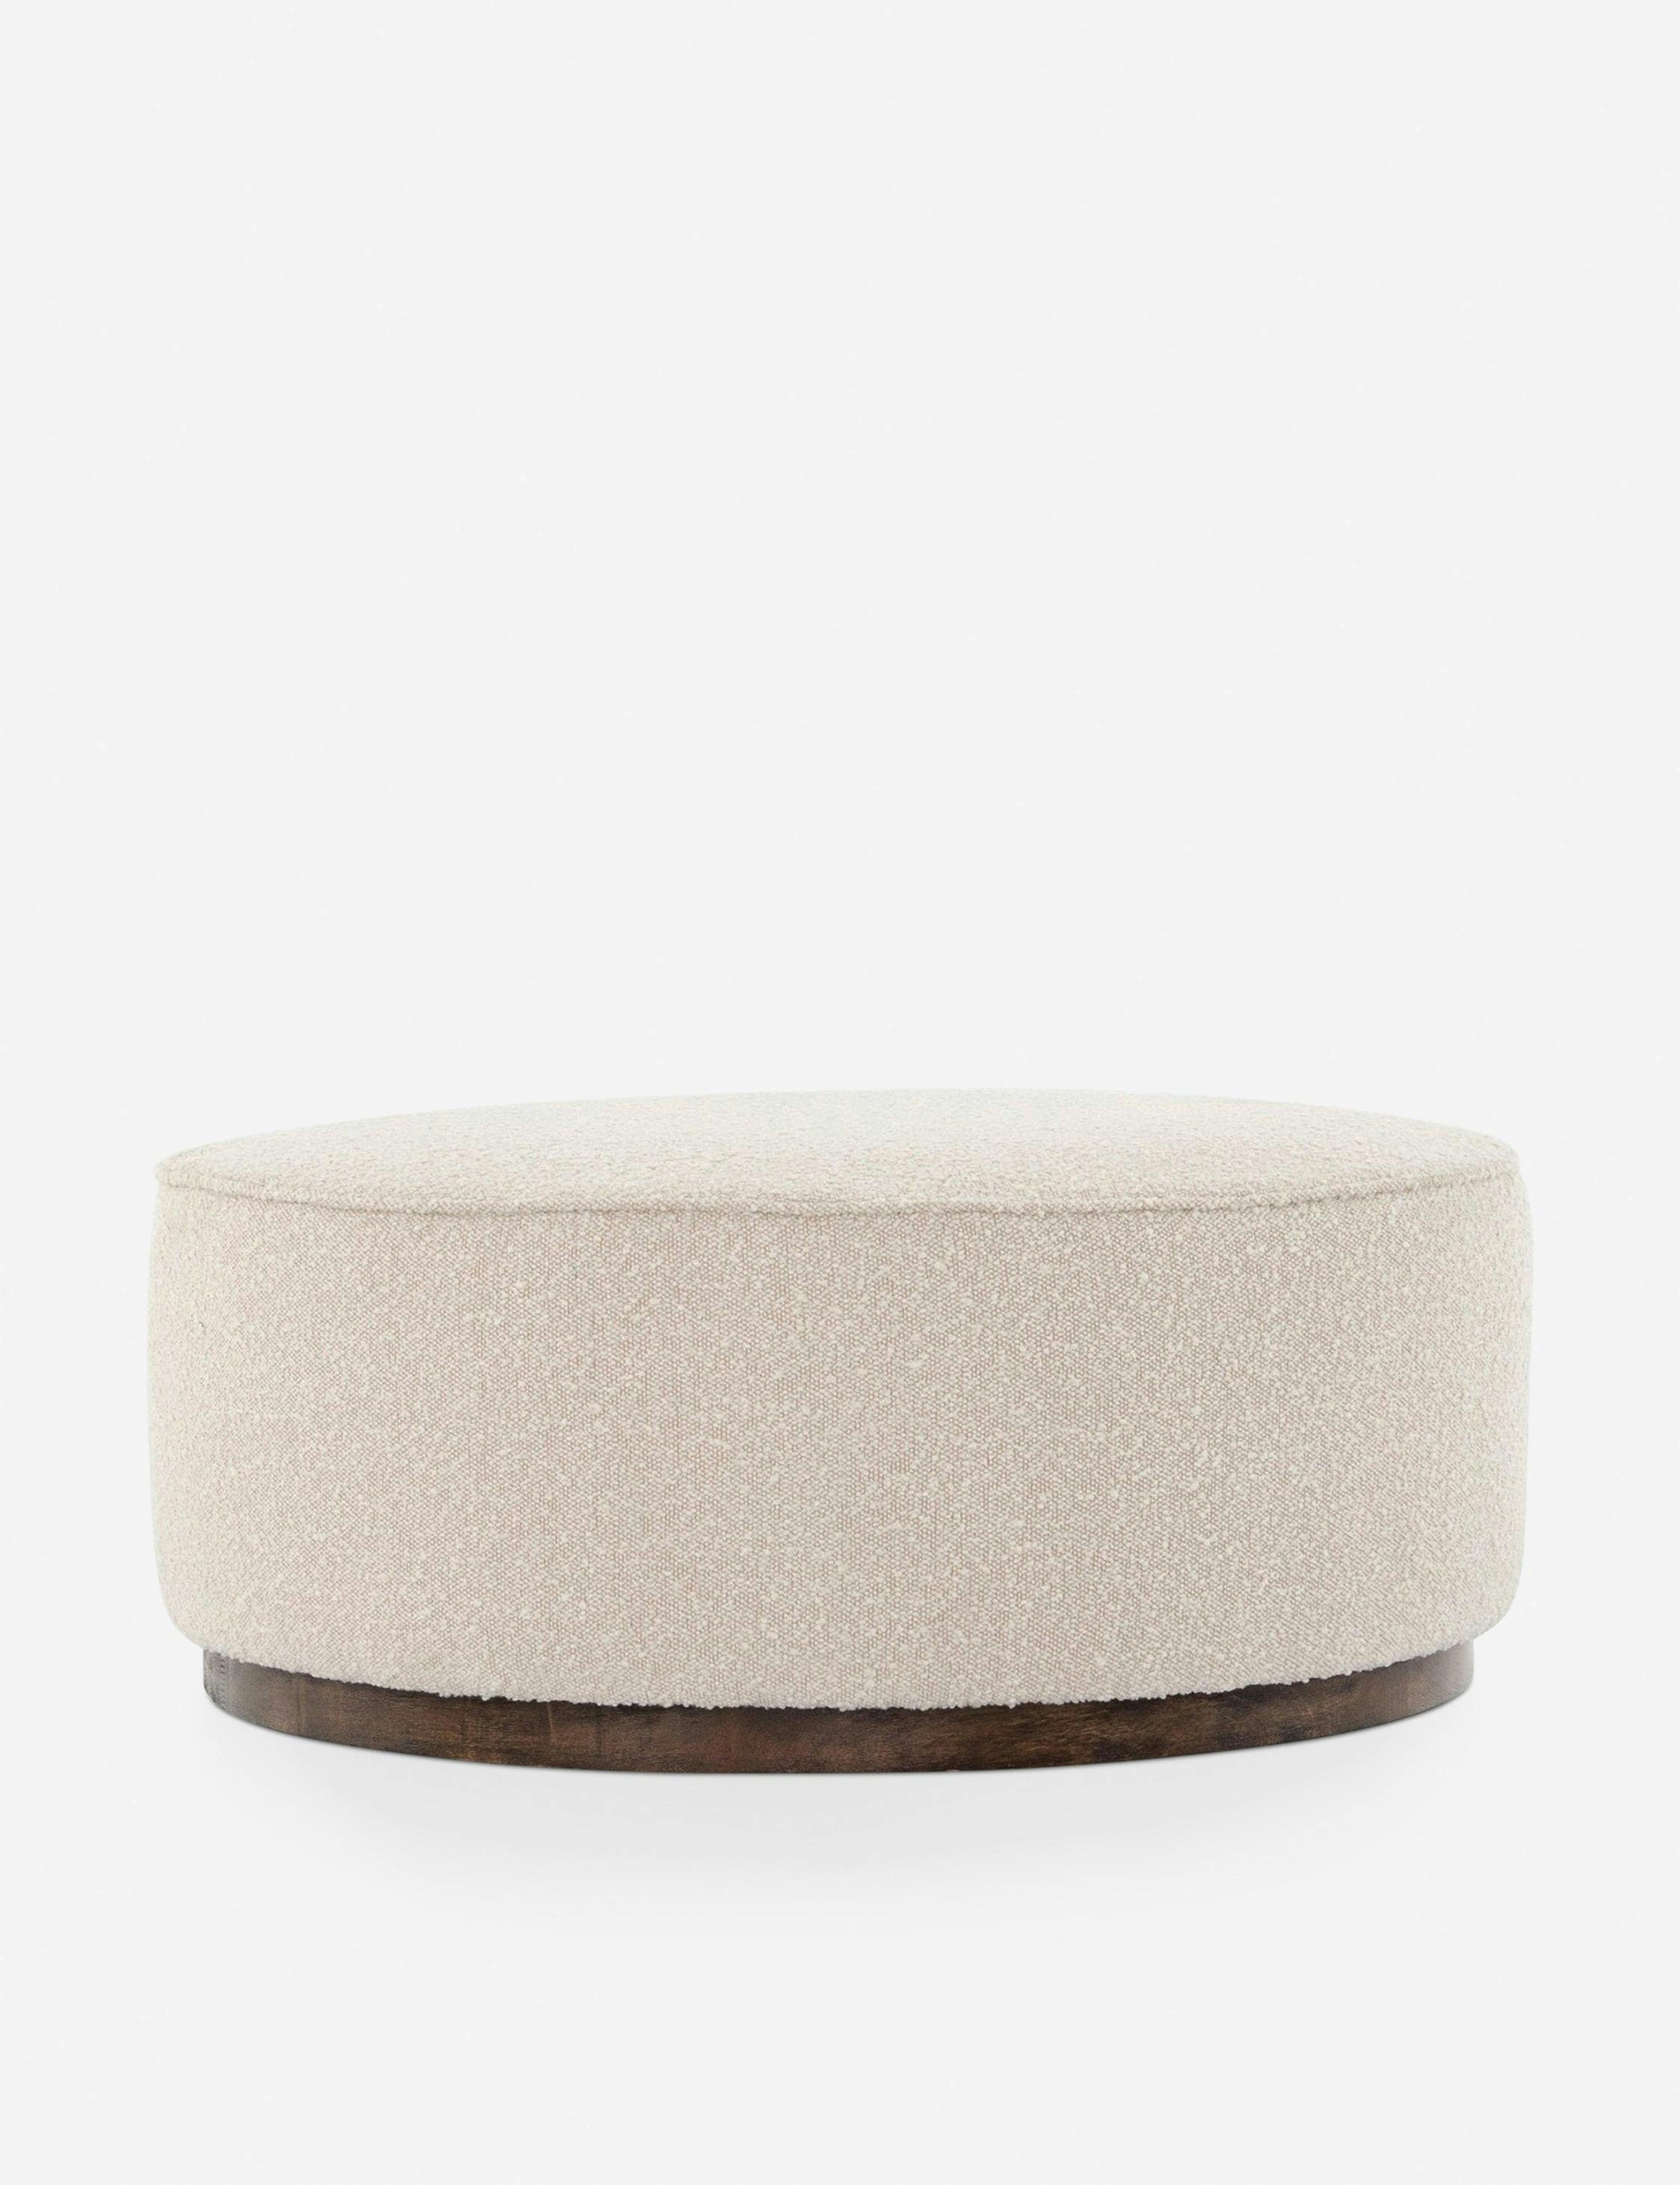 Sinclair 36" Cream Round Ottoman with Distressed Natural Base